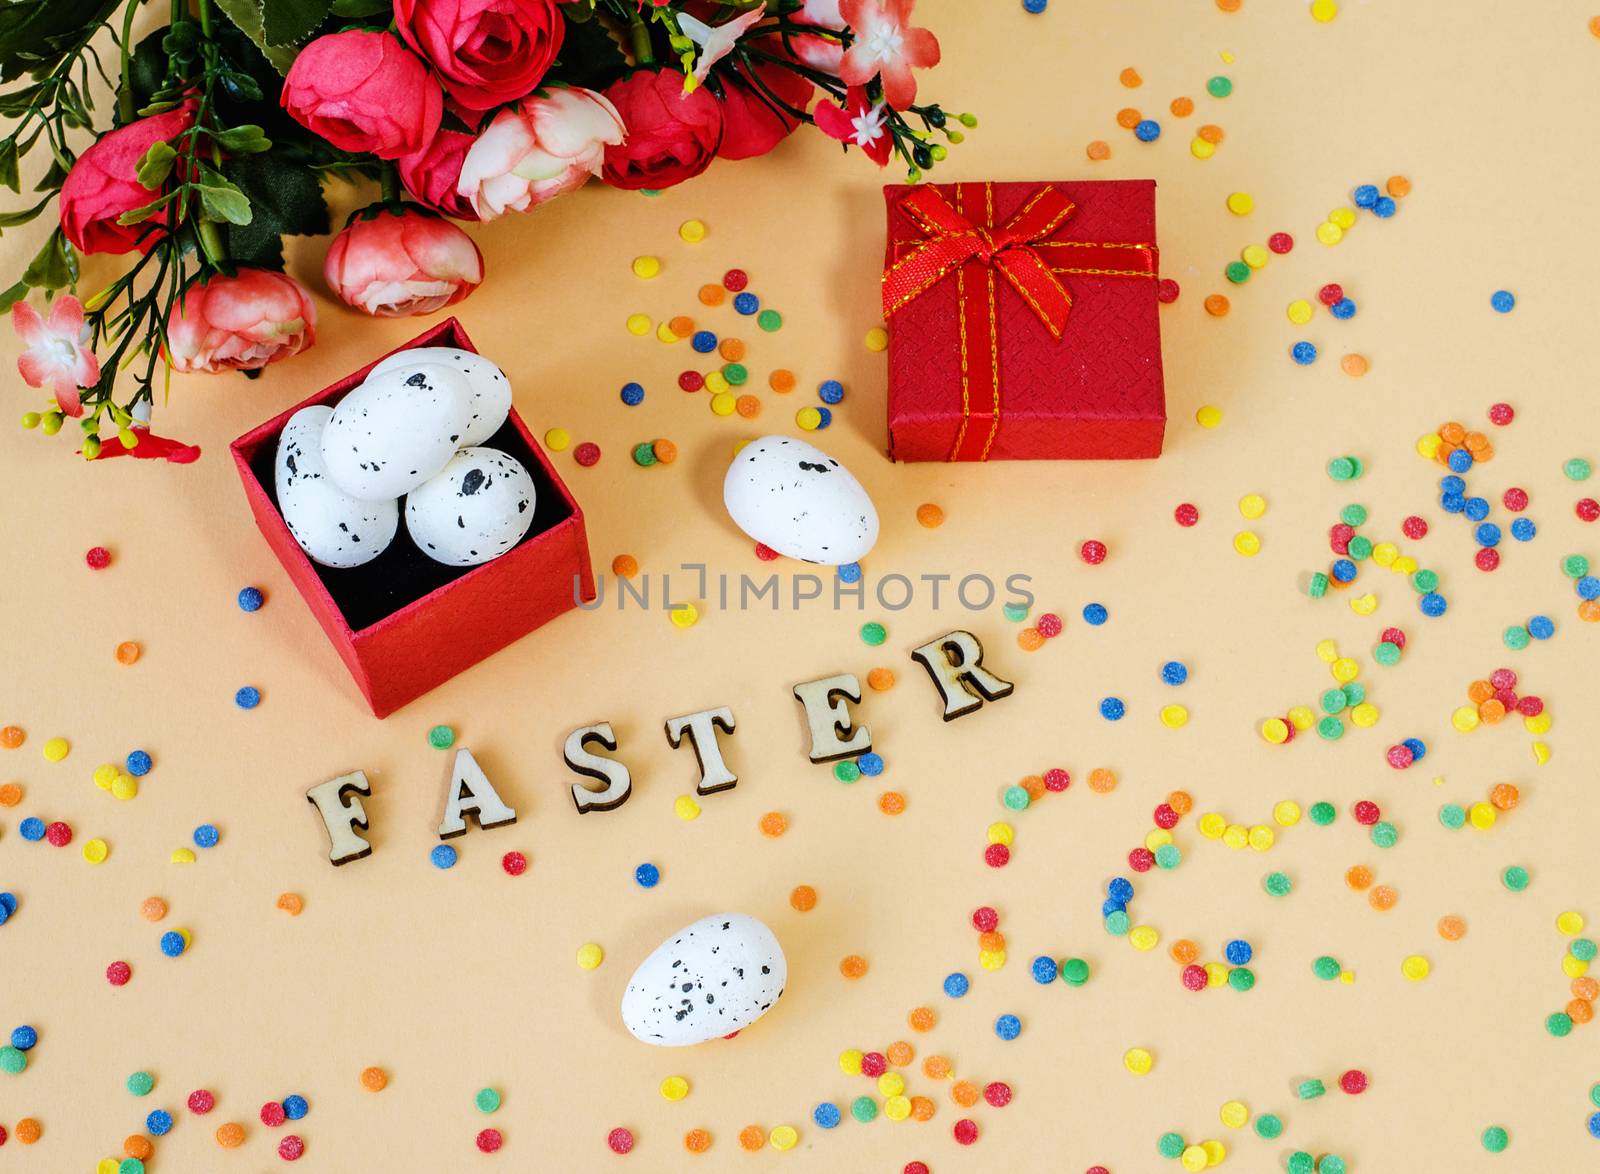 Festive Easter card with a bouquet of roses and a red box.